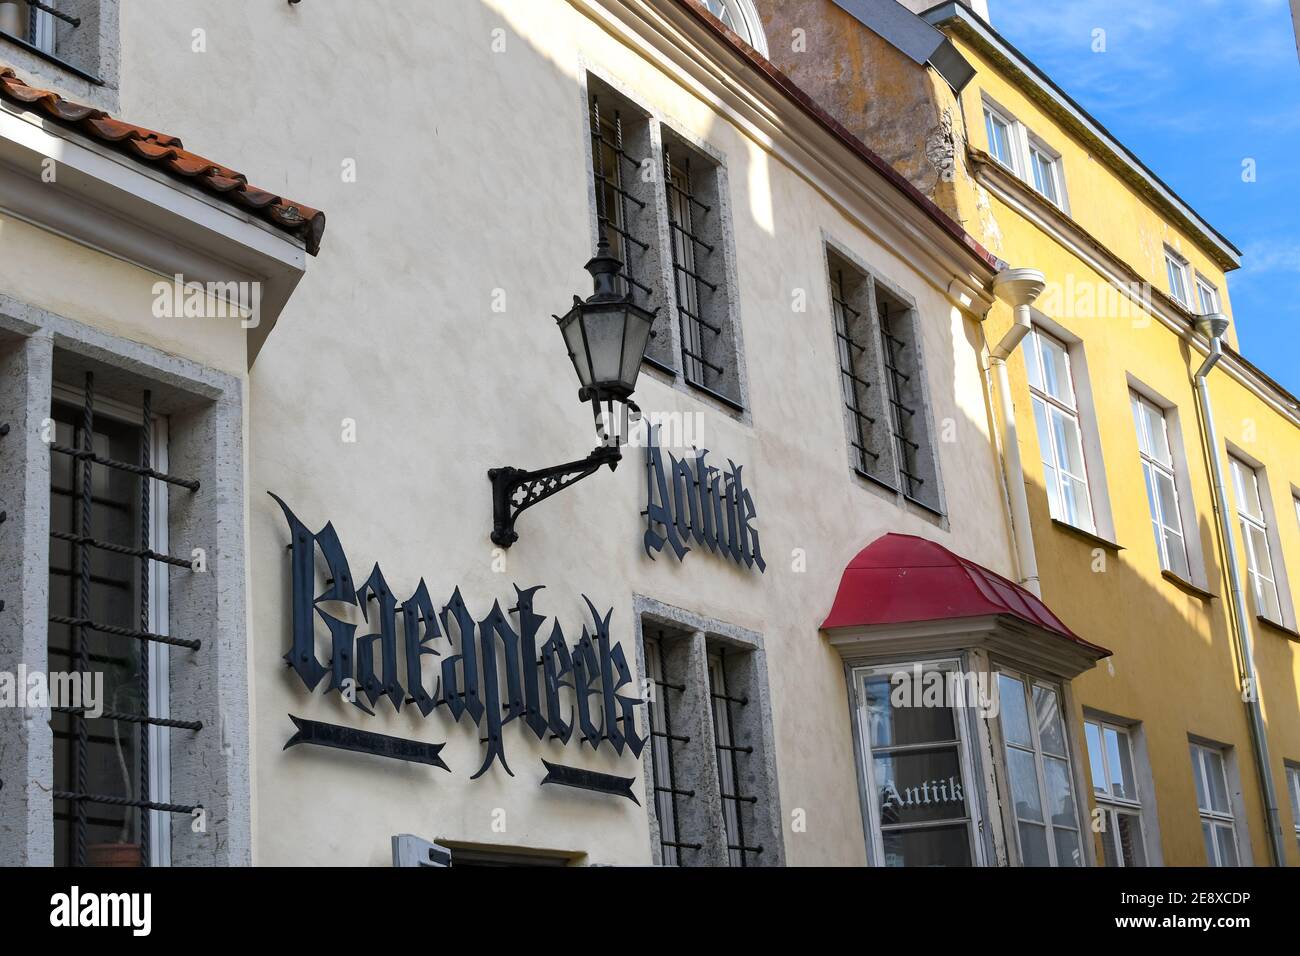 The facade of Raeapteek, one of the oldest continuously running pharmacies in Europe located in the Old Town of the Baltic city of Tallinn Estonia Stock Photo